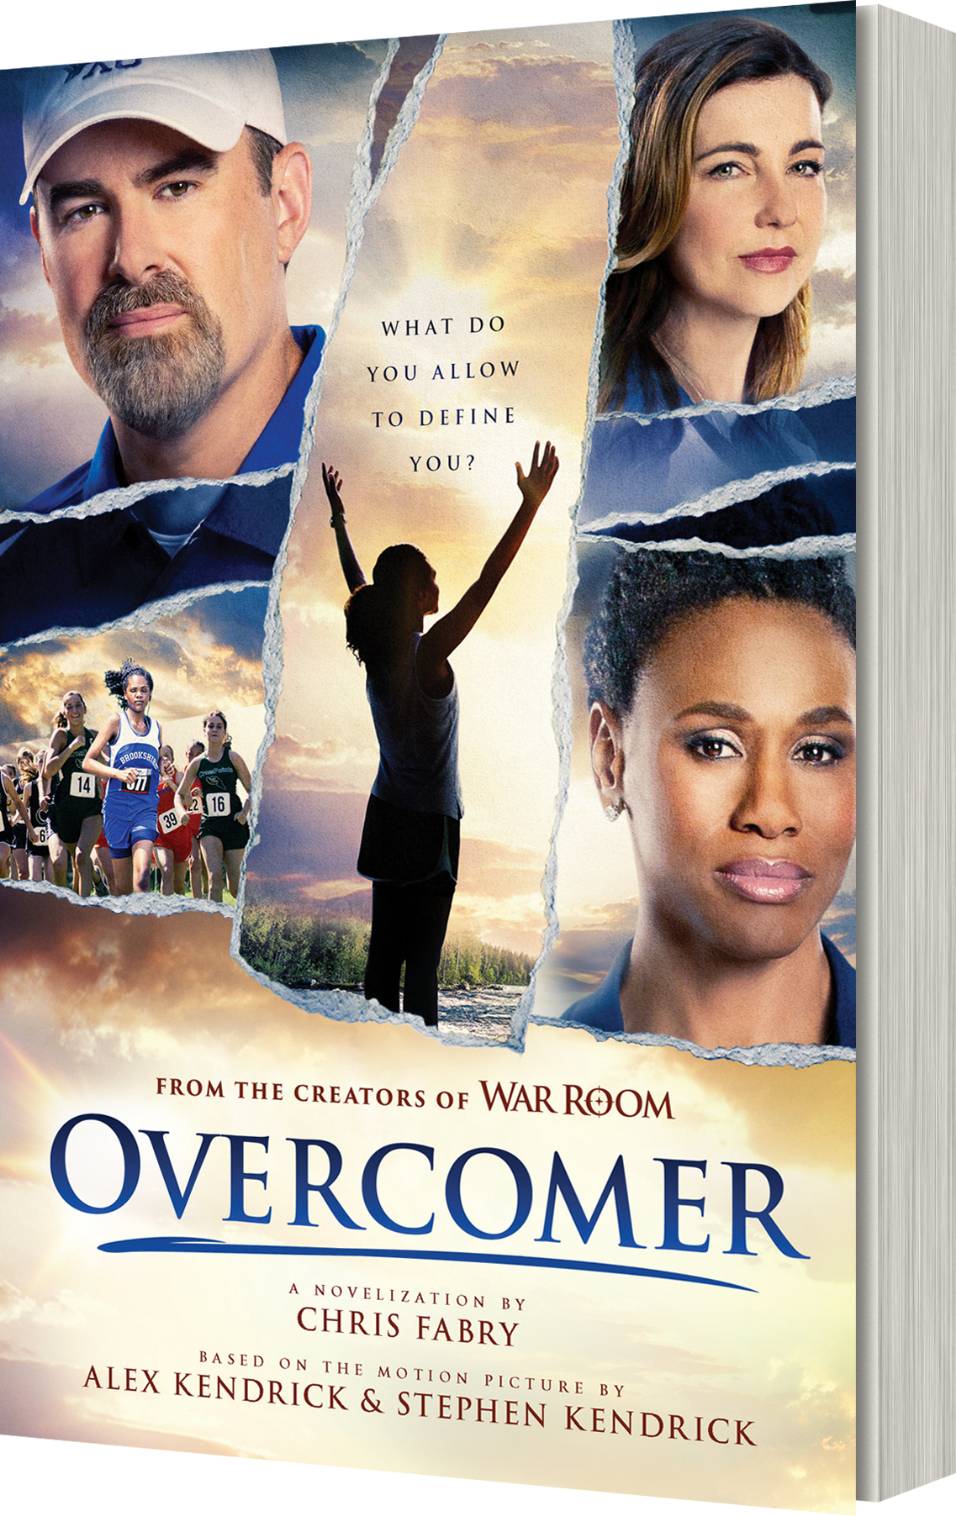 Cover of Overcomer, a novelization based on the motion picture by Alex and Stephen Kendrick